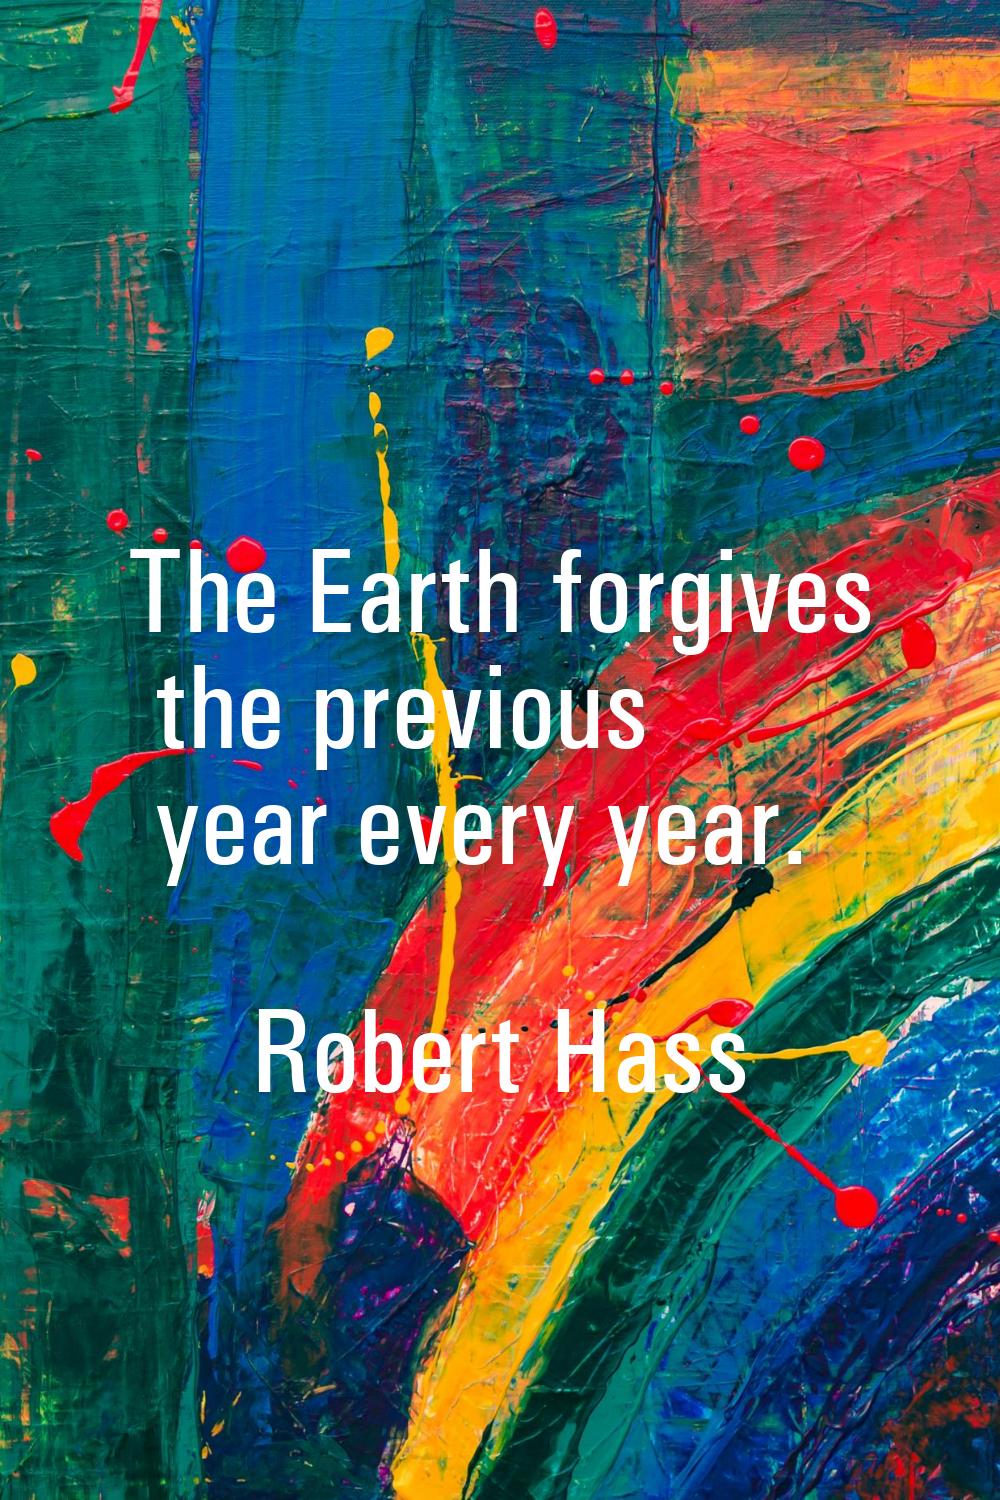 The Earth forgives the previous year every year.